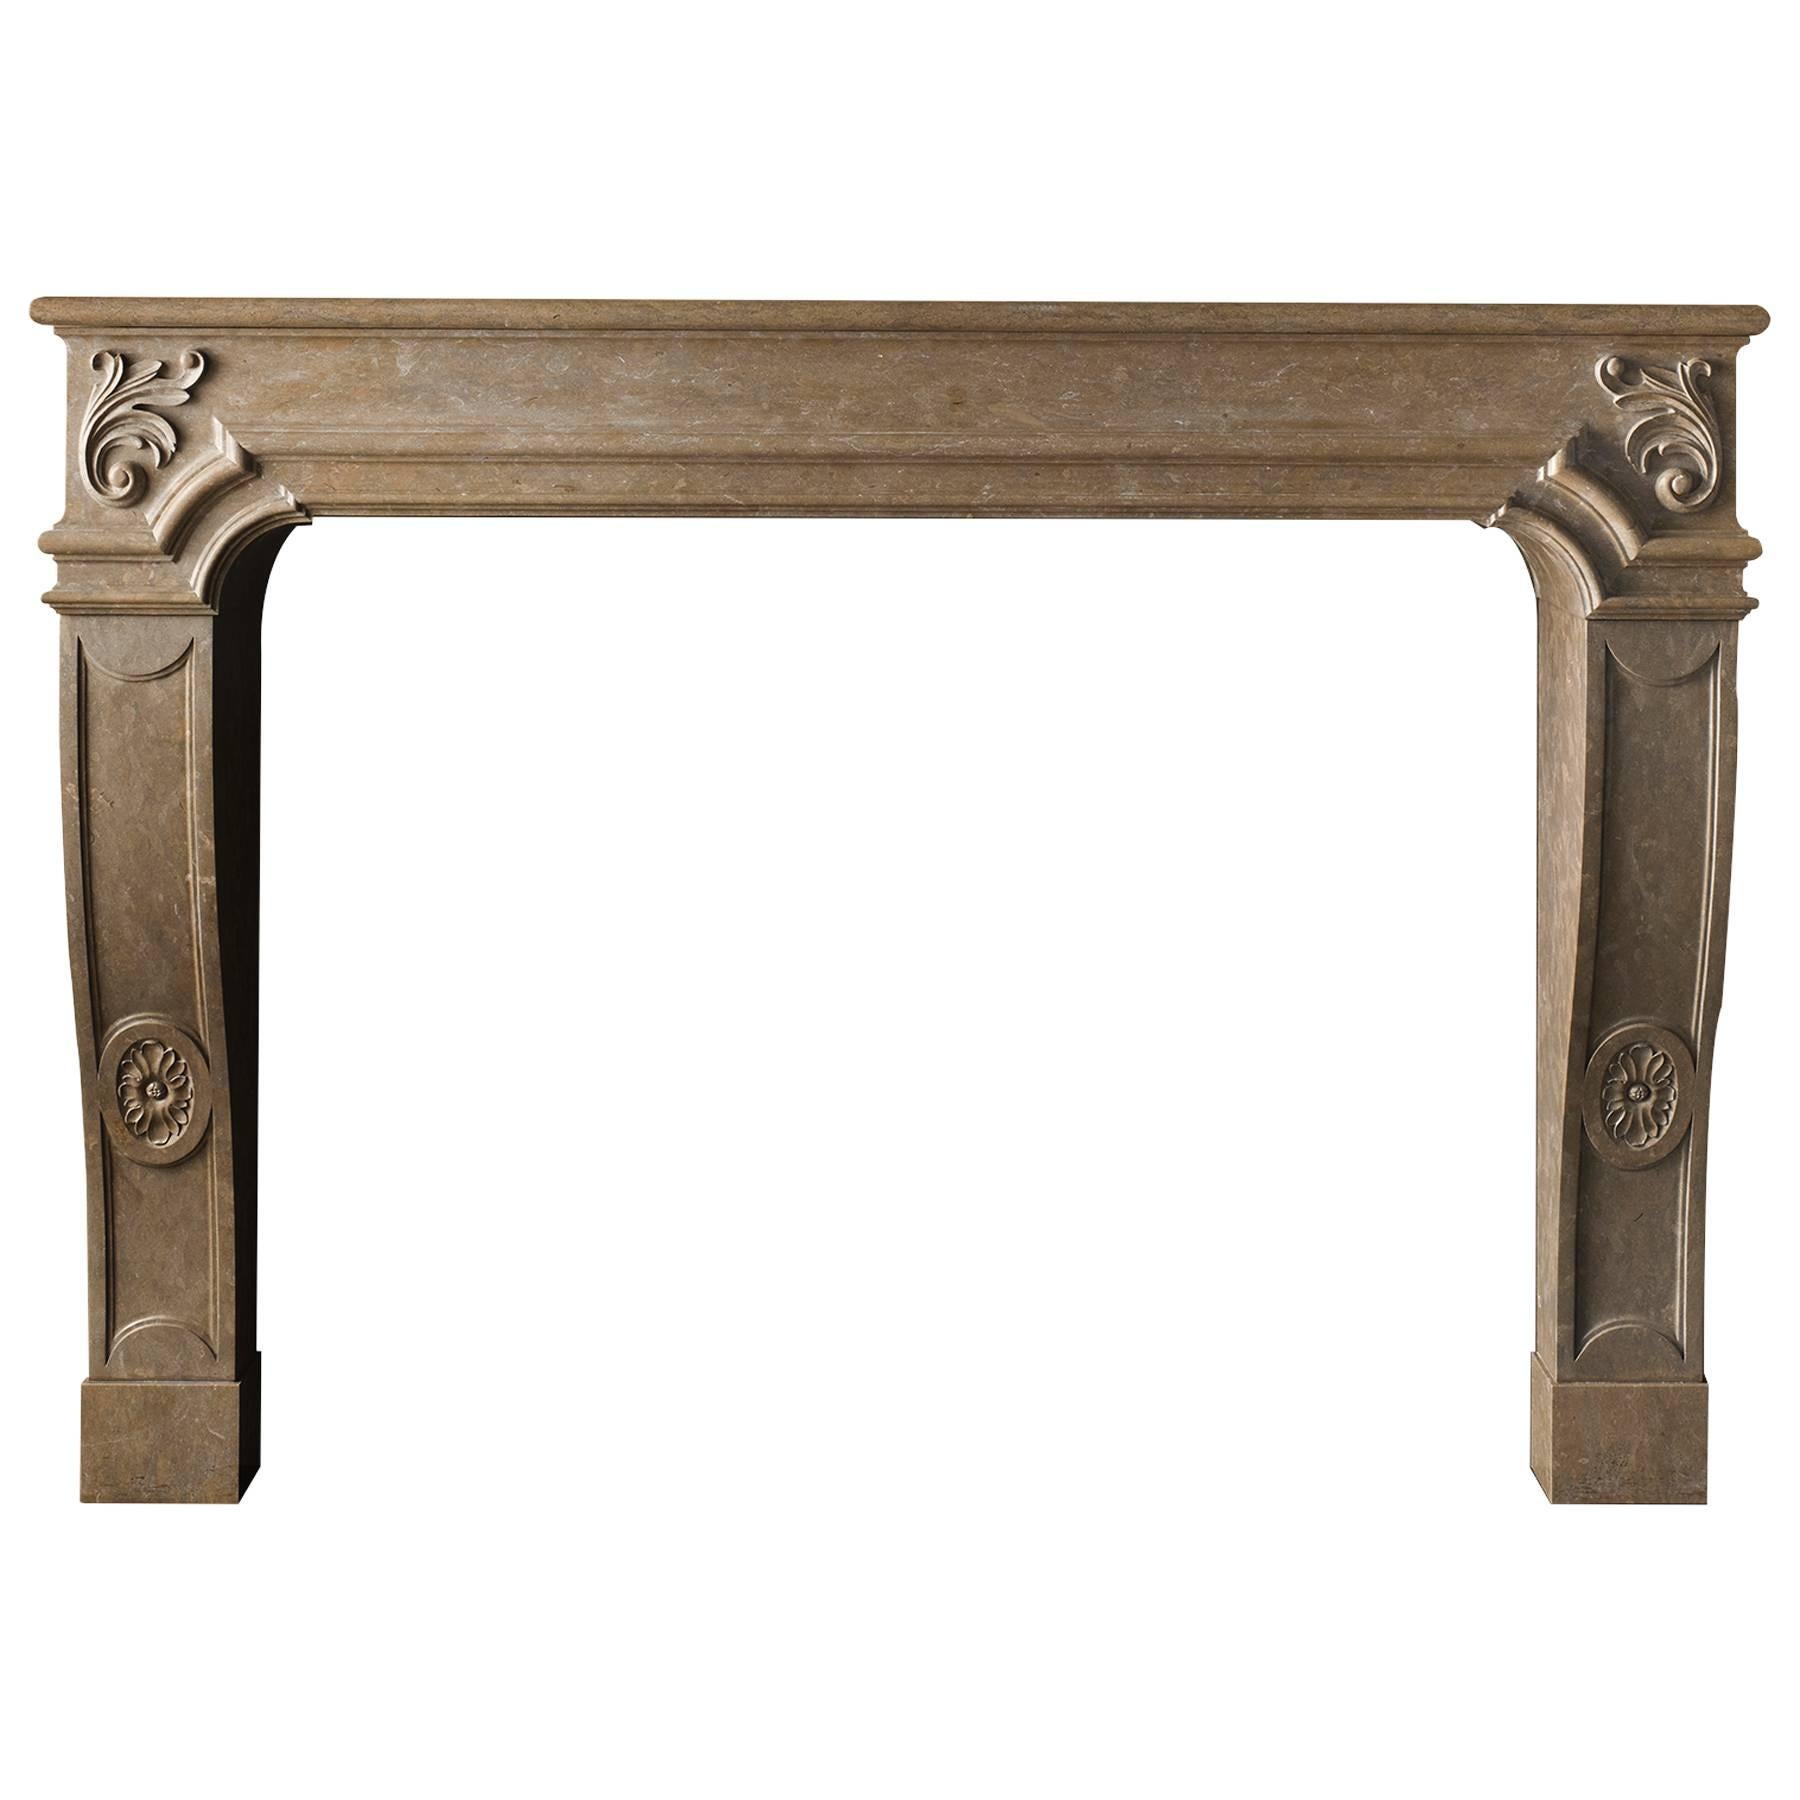 The Antibes, a French Regency Style Mantel Carved in Limestone